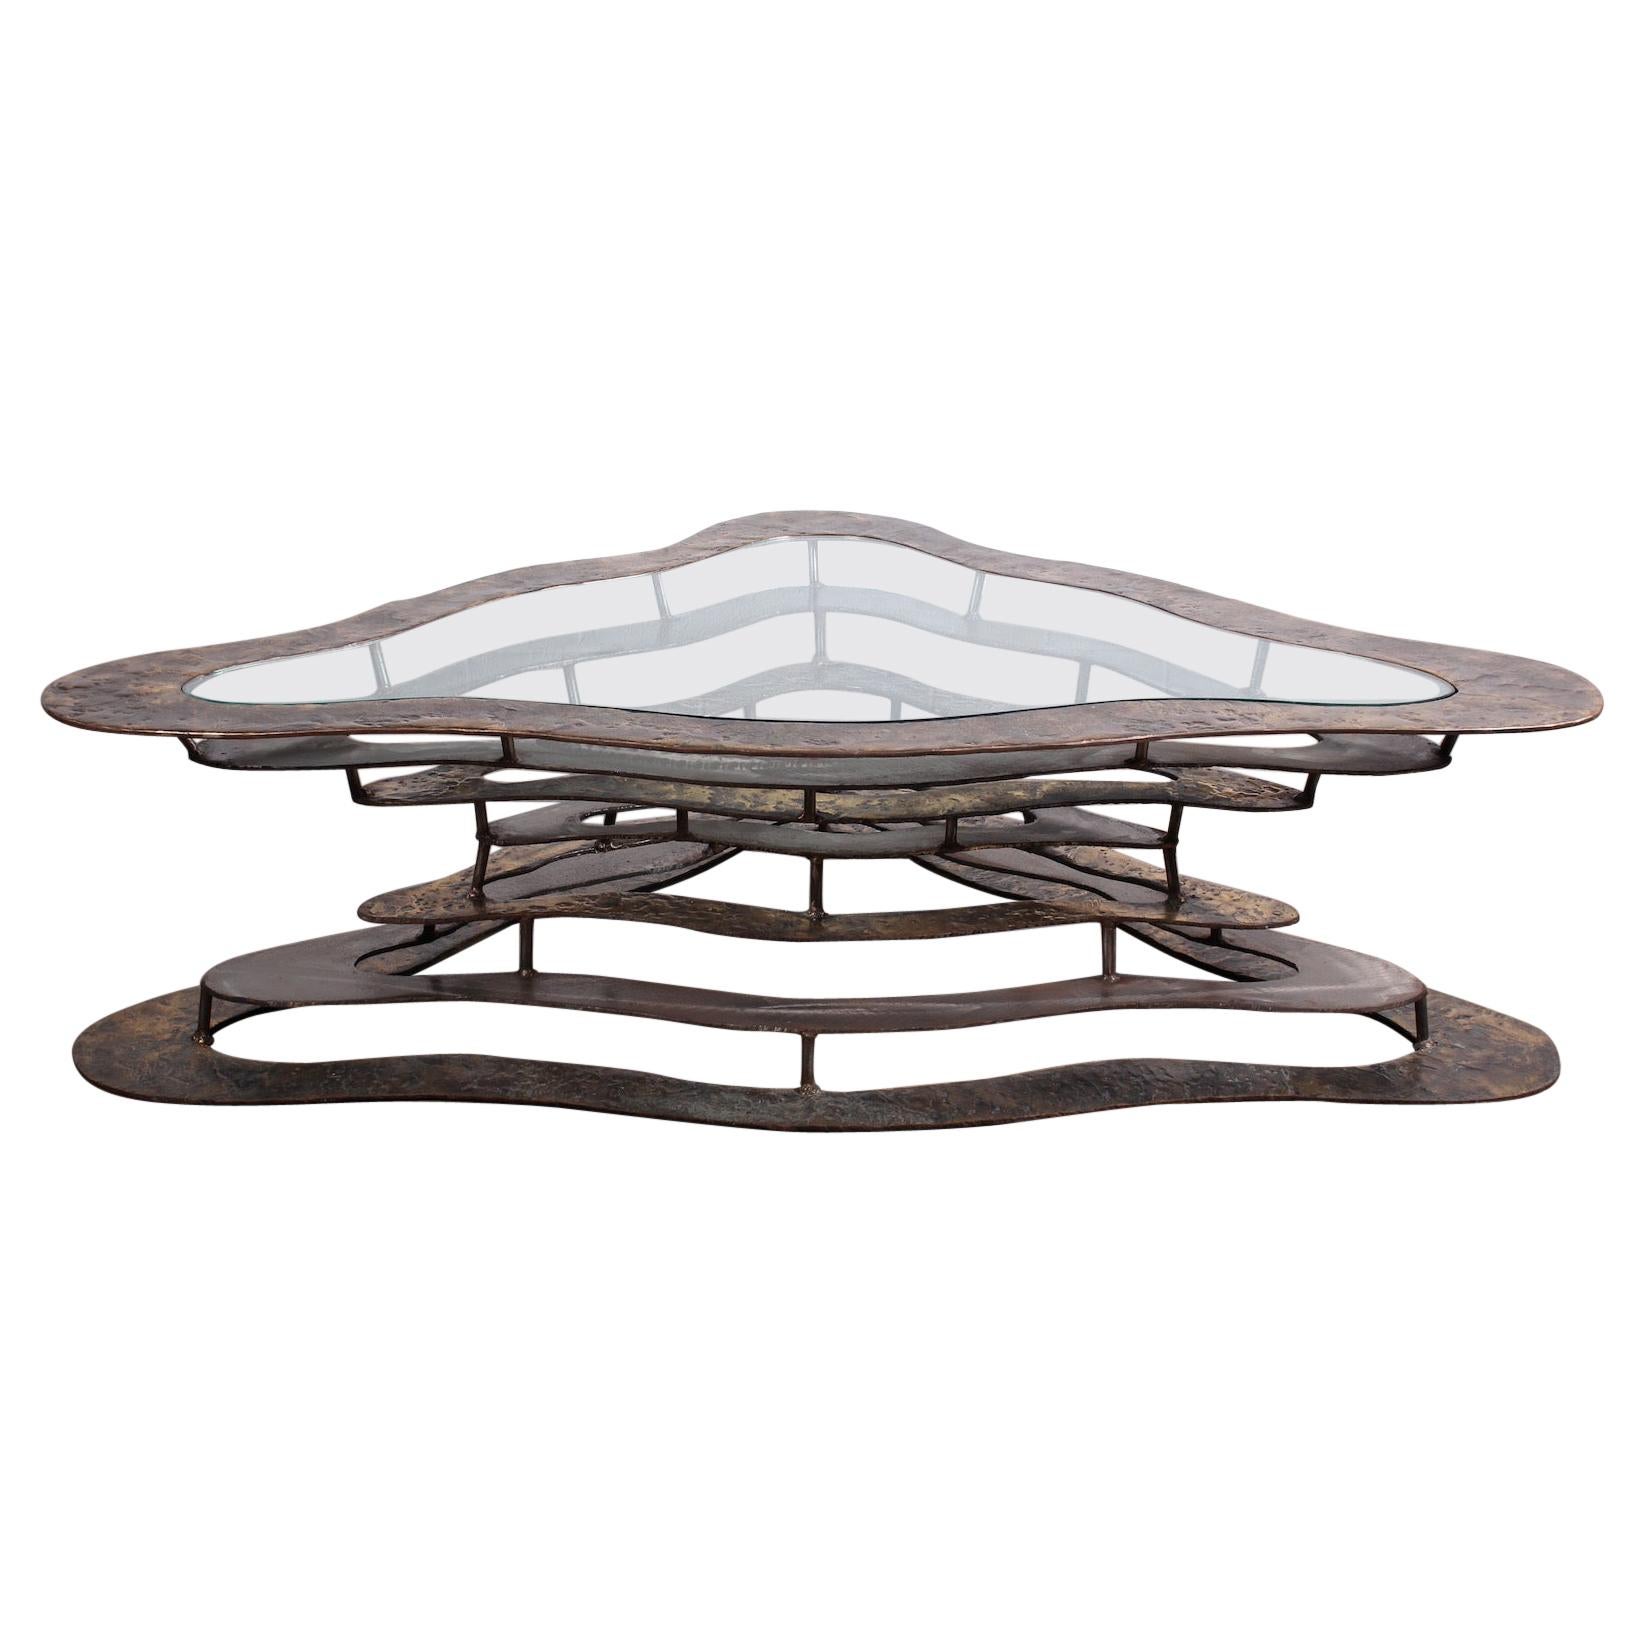 Bronze and Steel "Volcano" Coffee Table by Silas Seandel